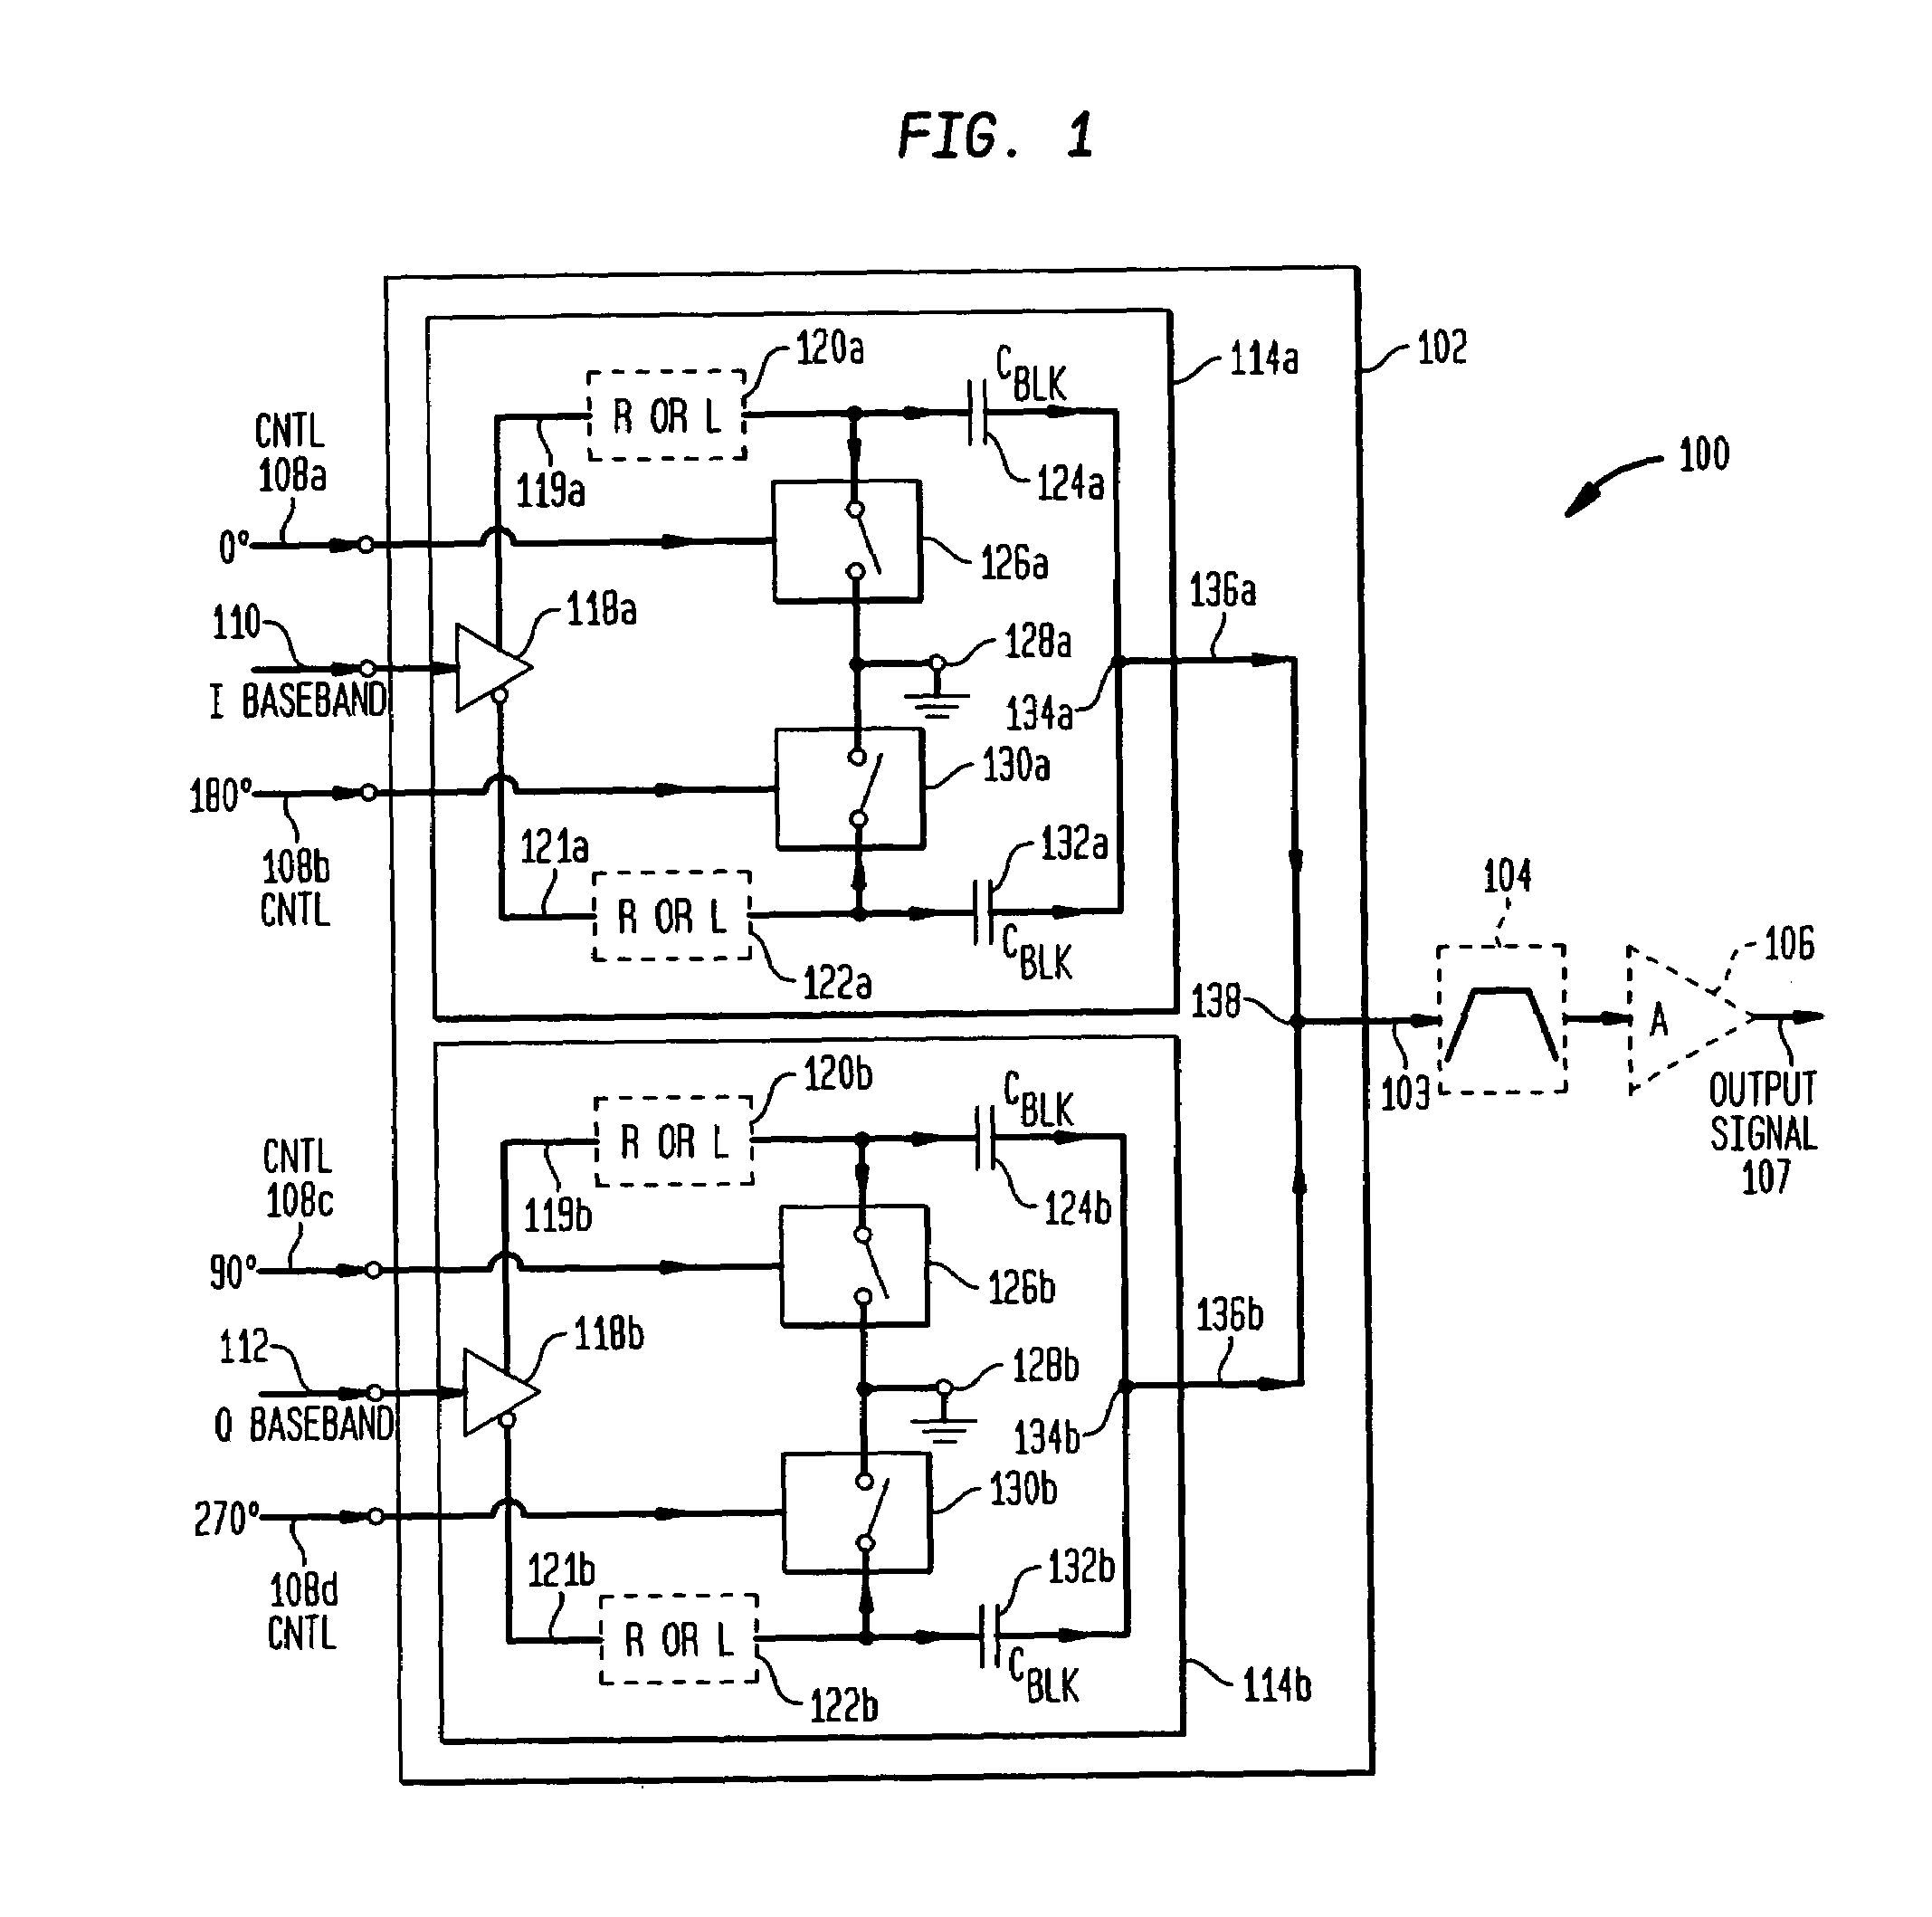 Active polyphase inverter filter for quadrature signal generation